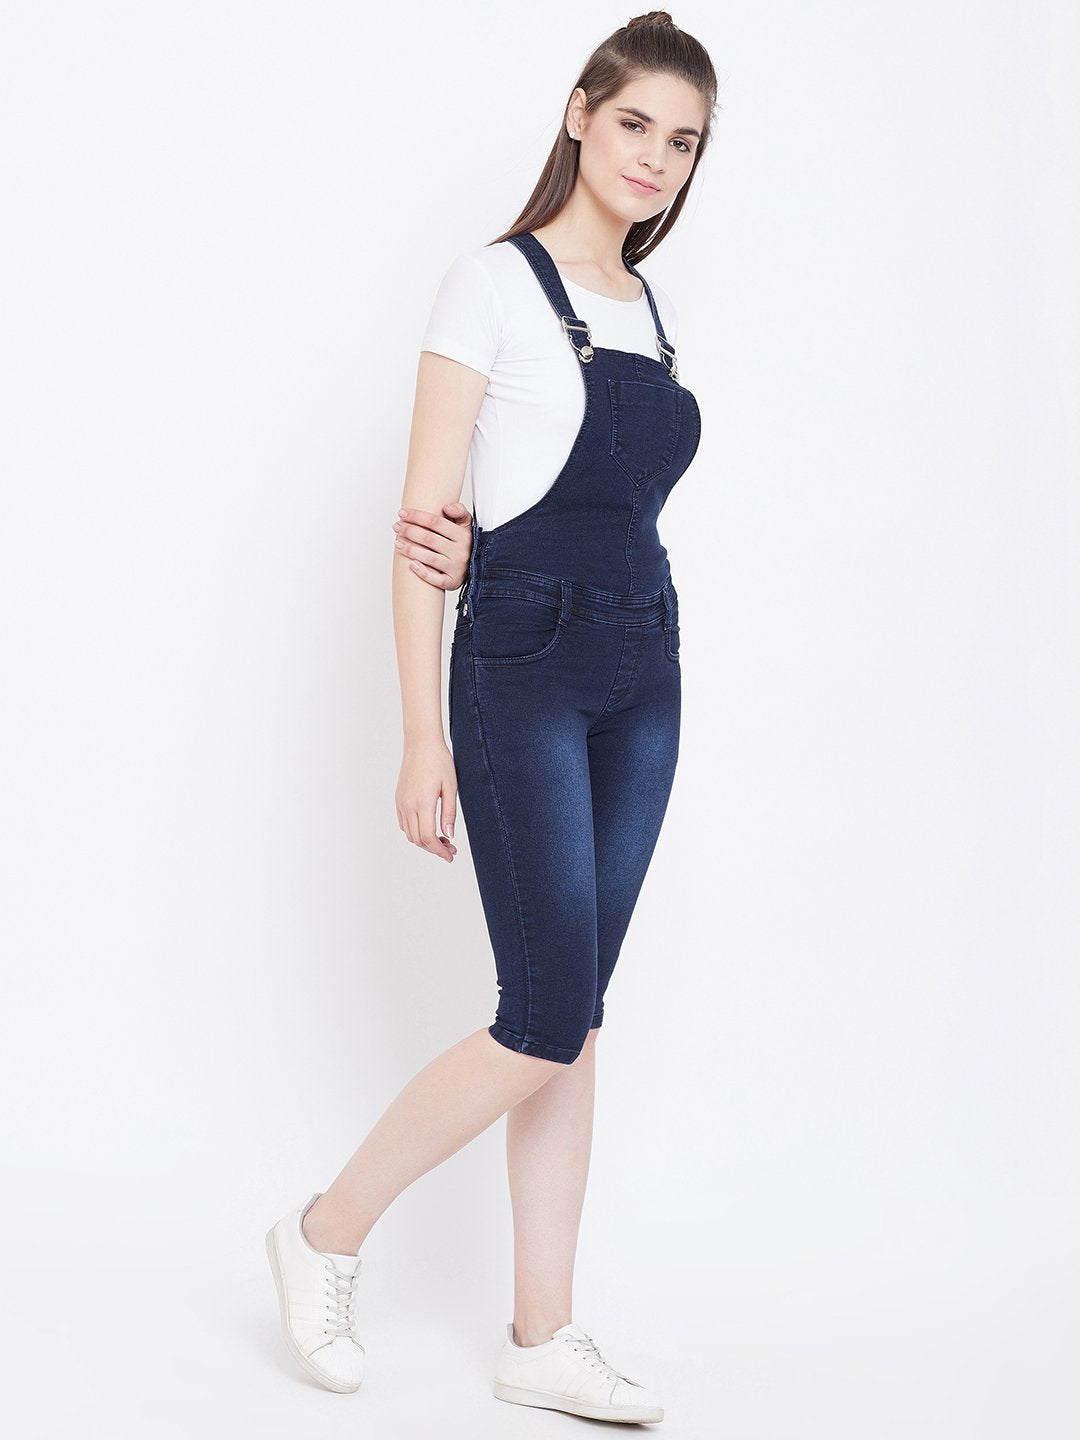 Stretchable Blue Capri Dungarees - NiftyJeans